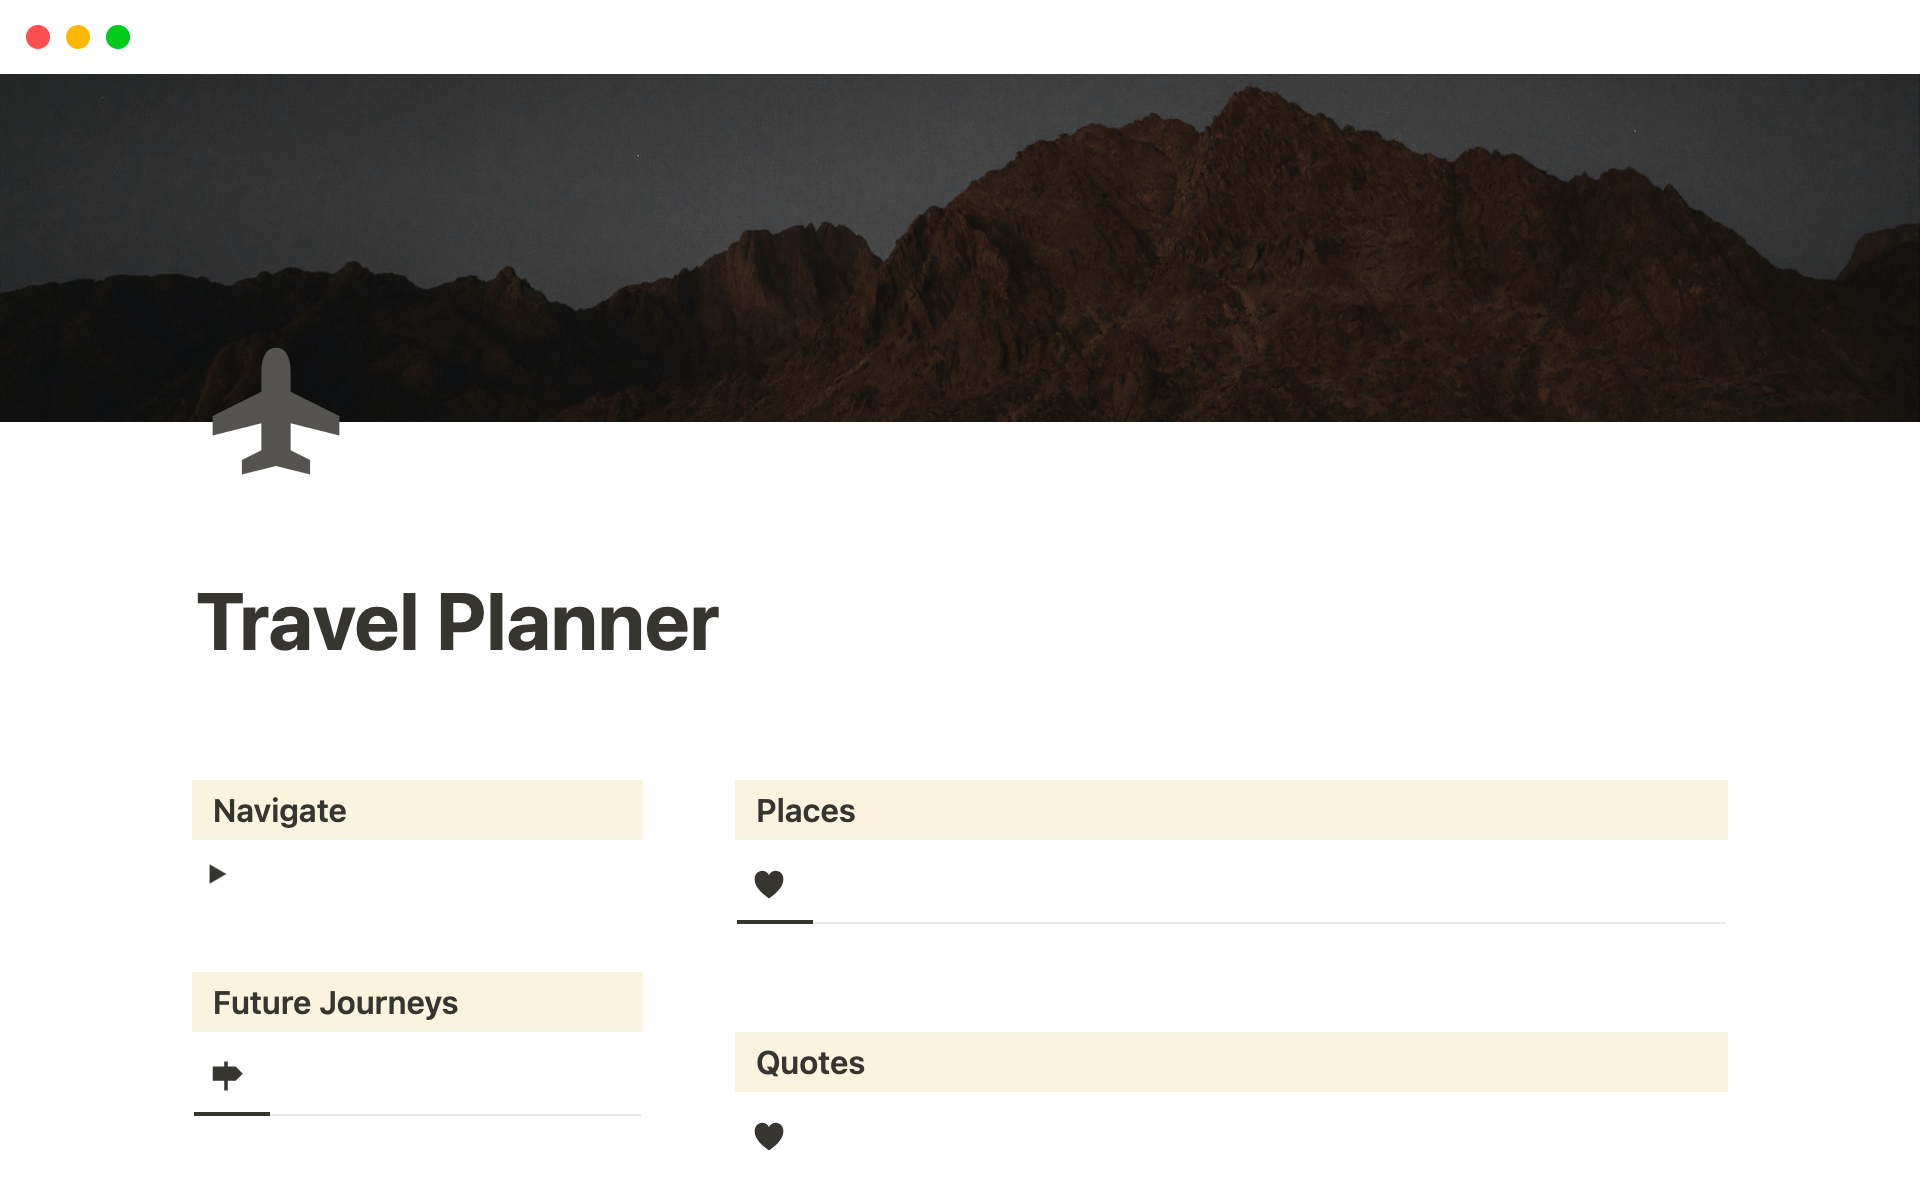 Plan detailed itineraries, journal your experiences with notes, stay on top of your travel calendar, set goals and bucket list items, and effortlessly manage trip finances.